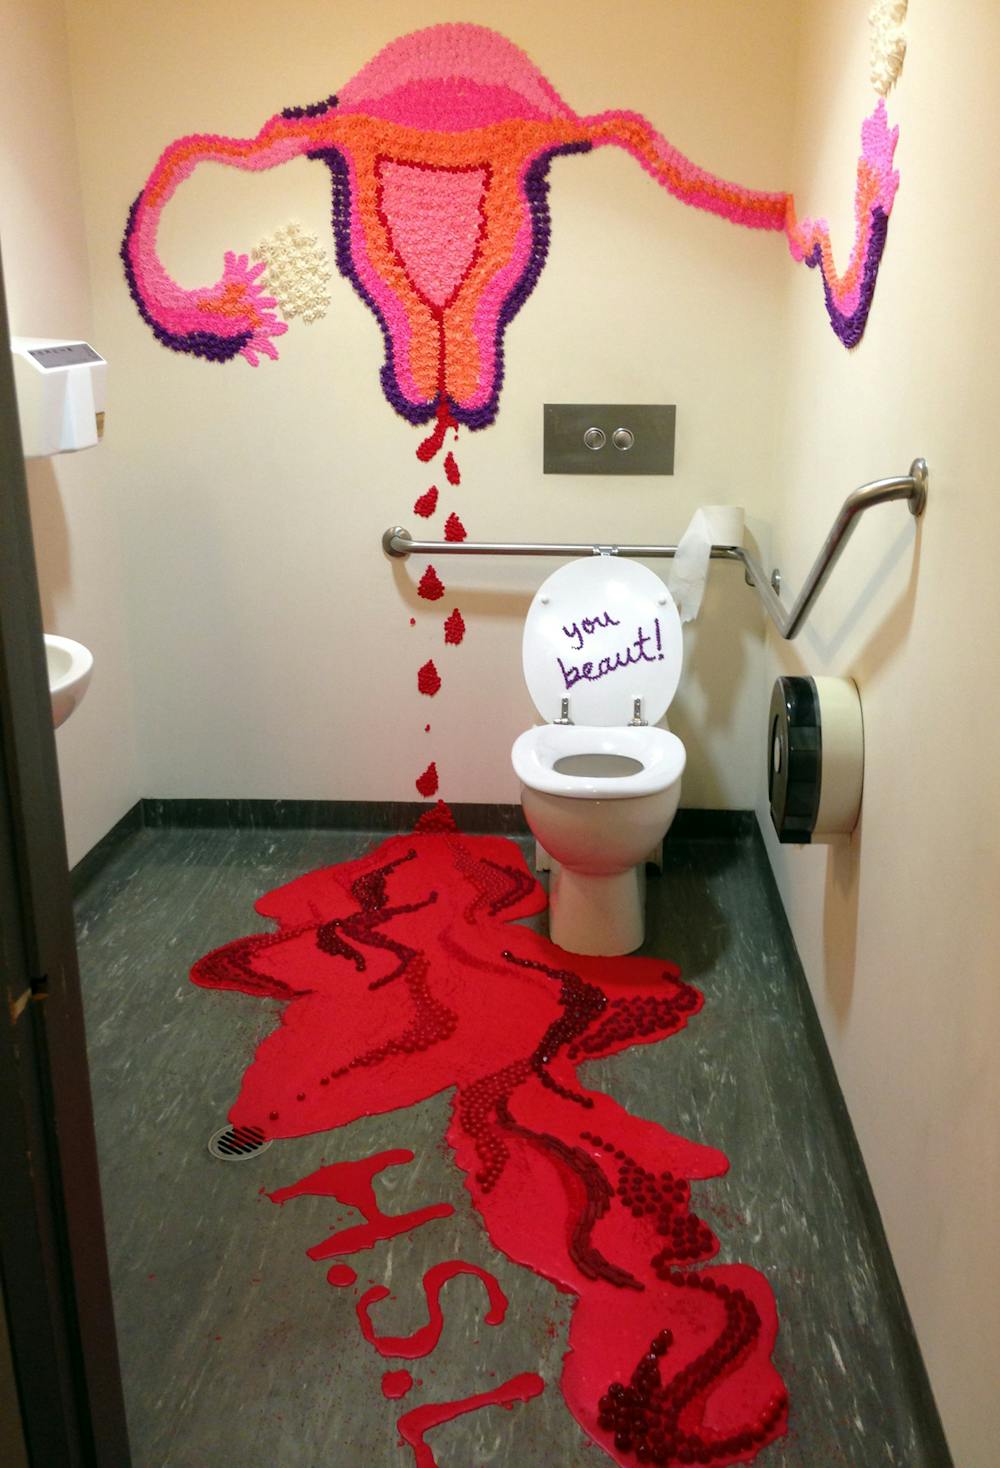 Feminist artist uses red paint and MENSTRUAL PADS as canvases